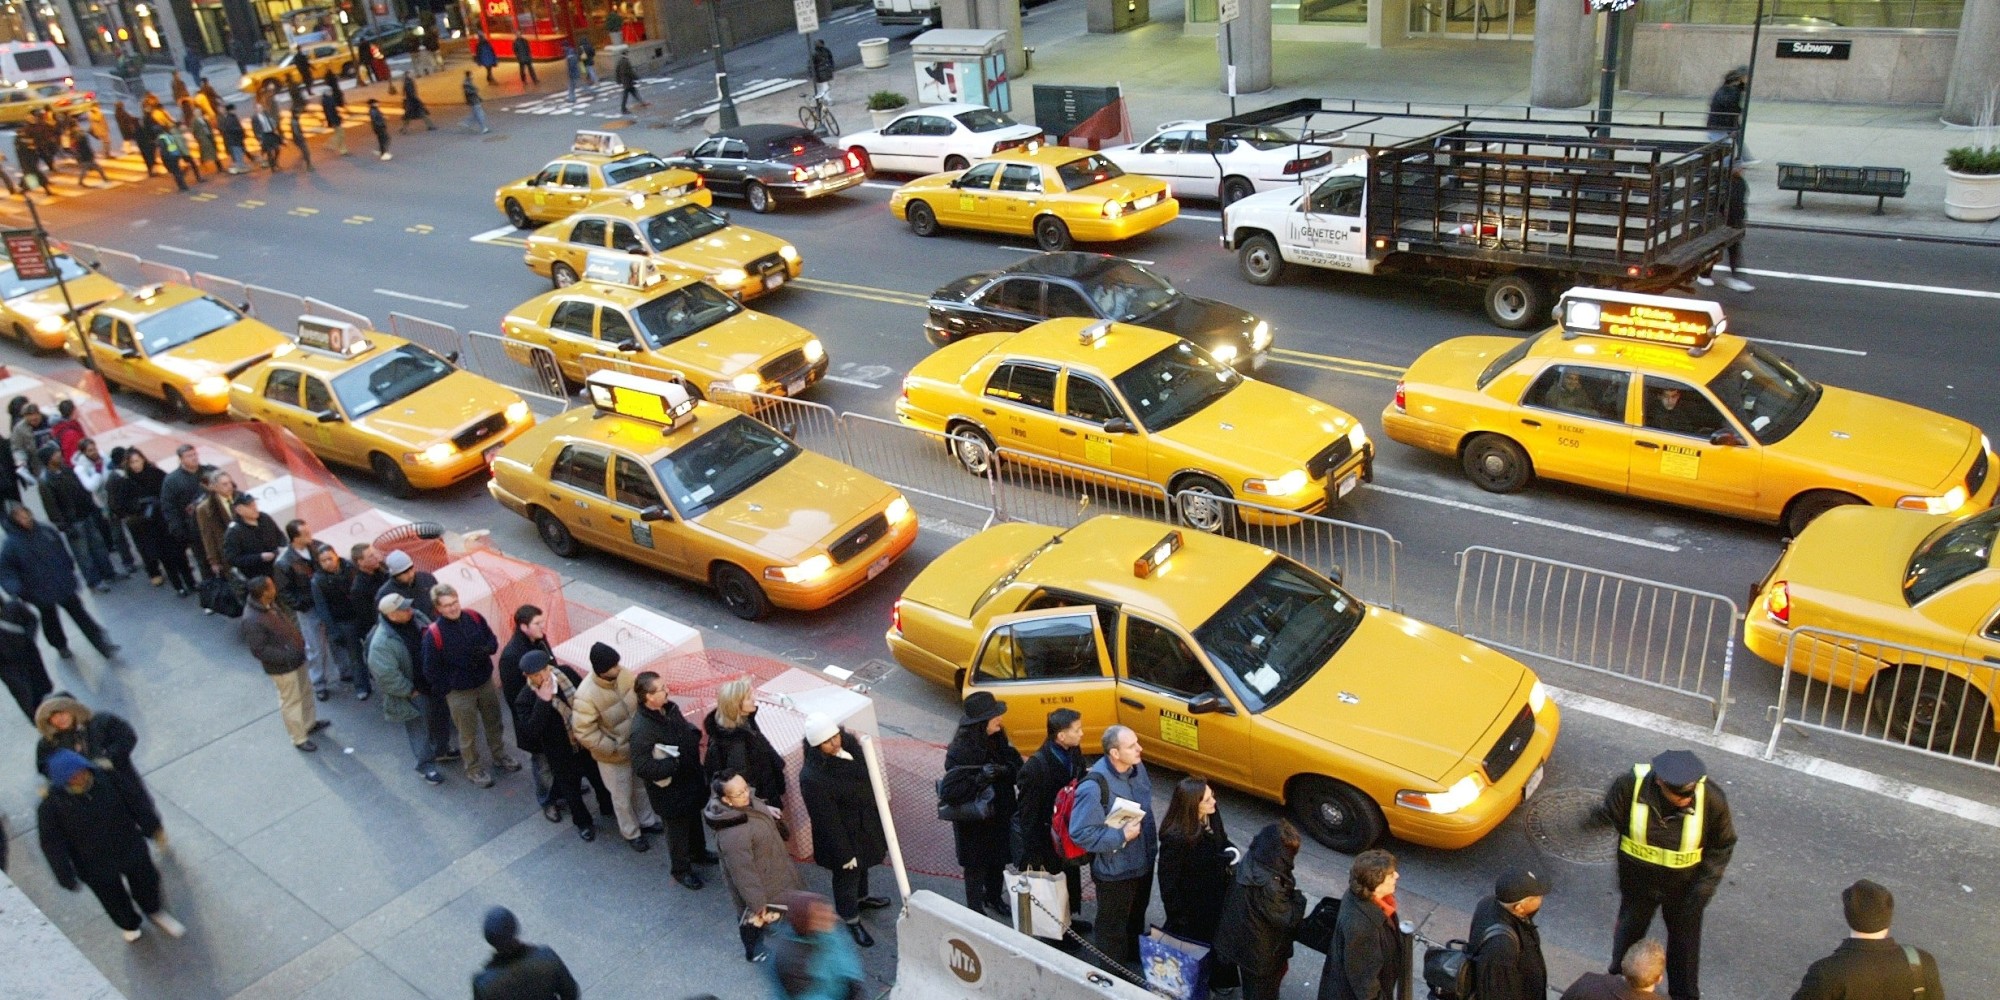 What other cities than New York use yellow cabs?